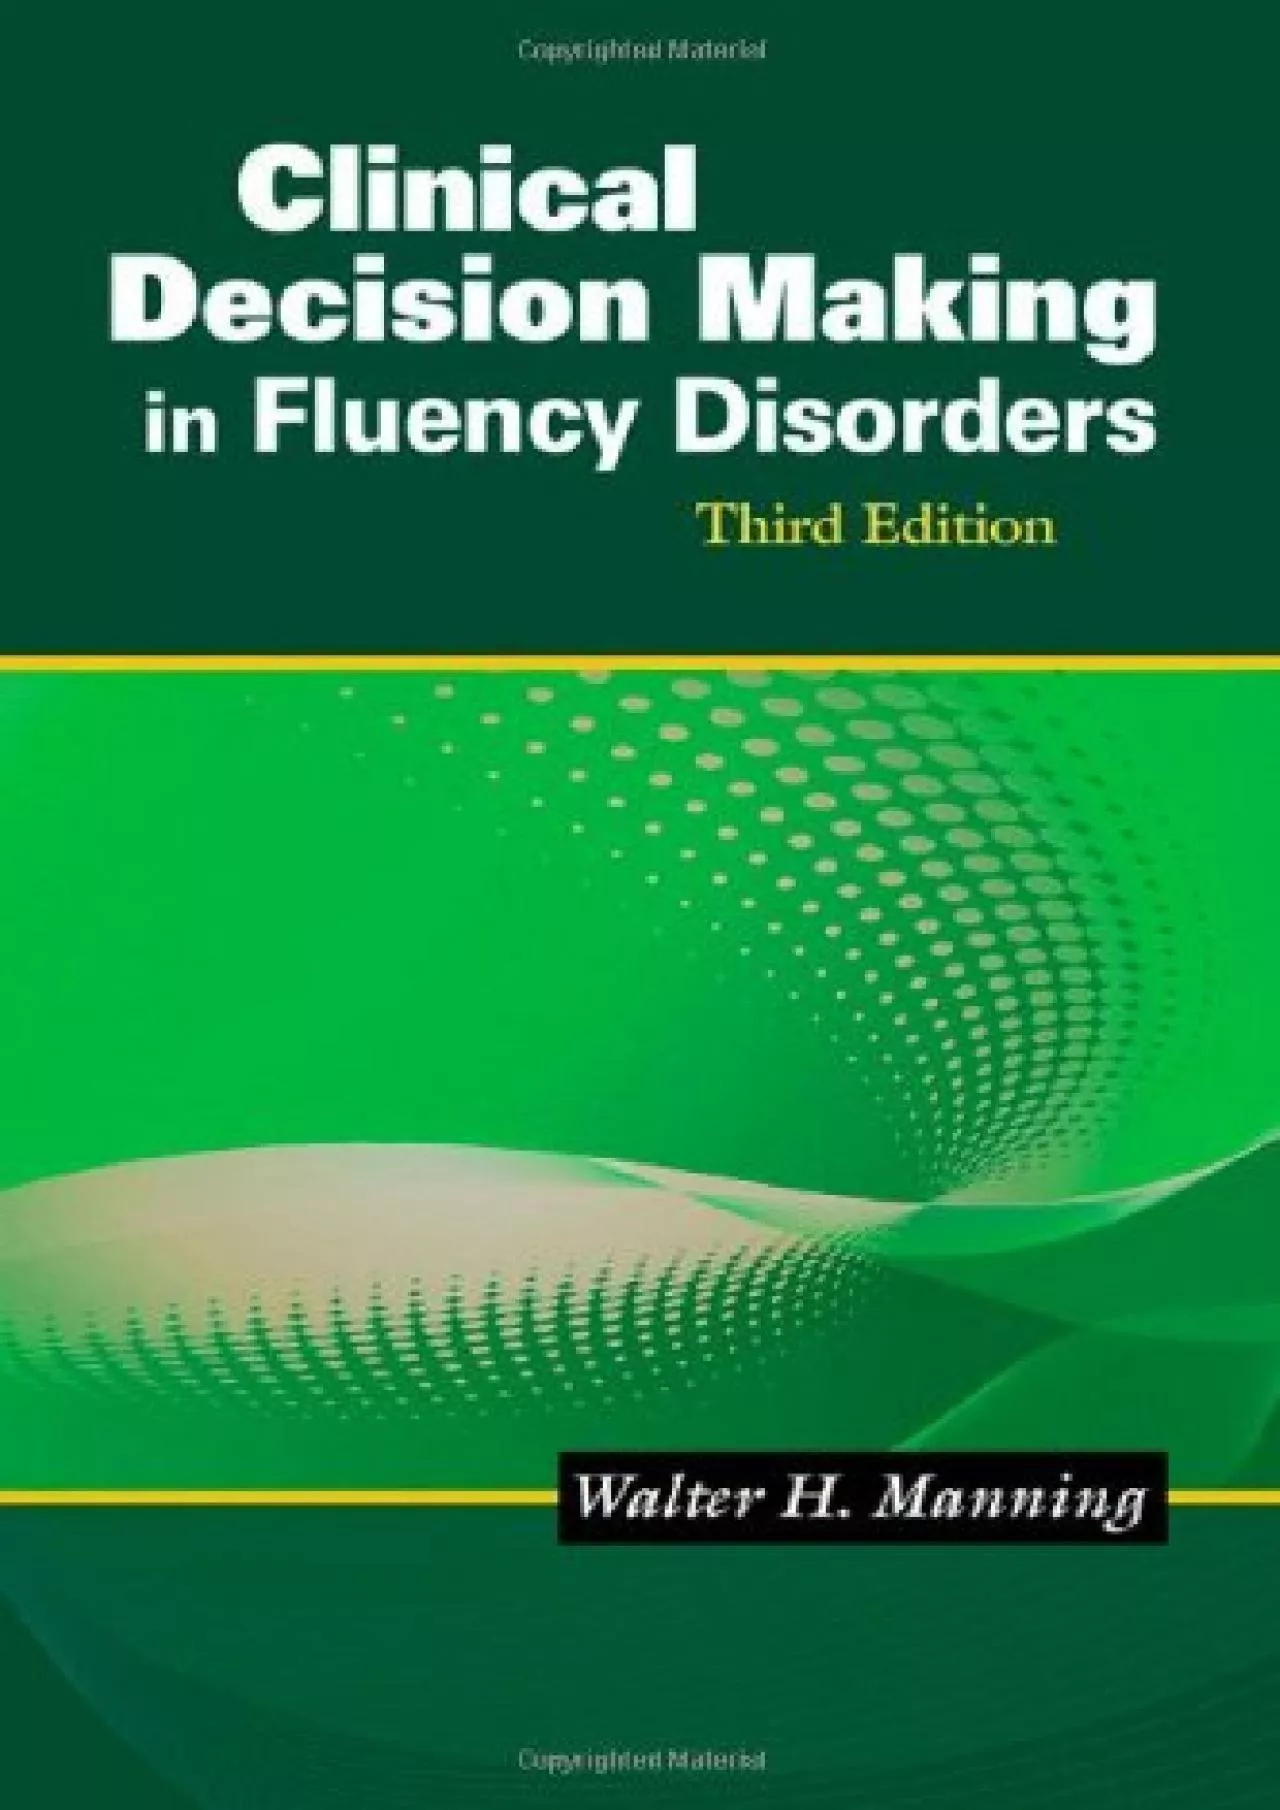 (DOWNLOAD)-Clinical Decision Making in Fluency Disorders